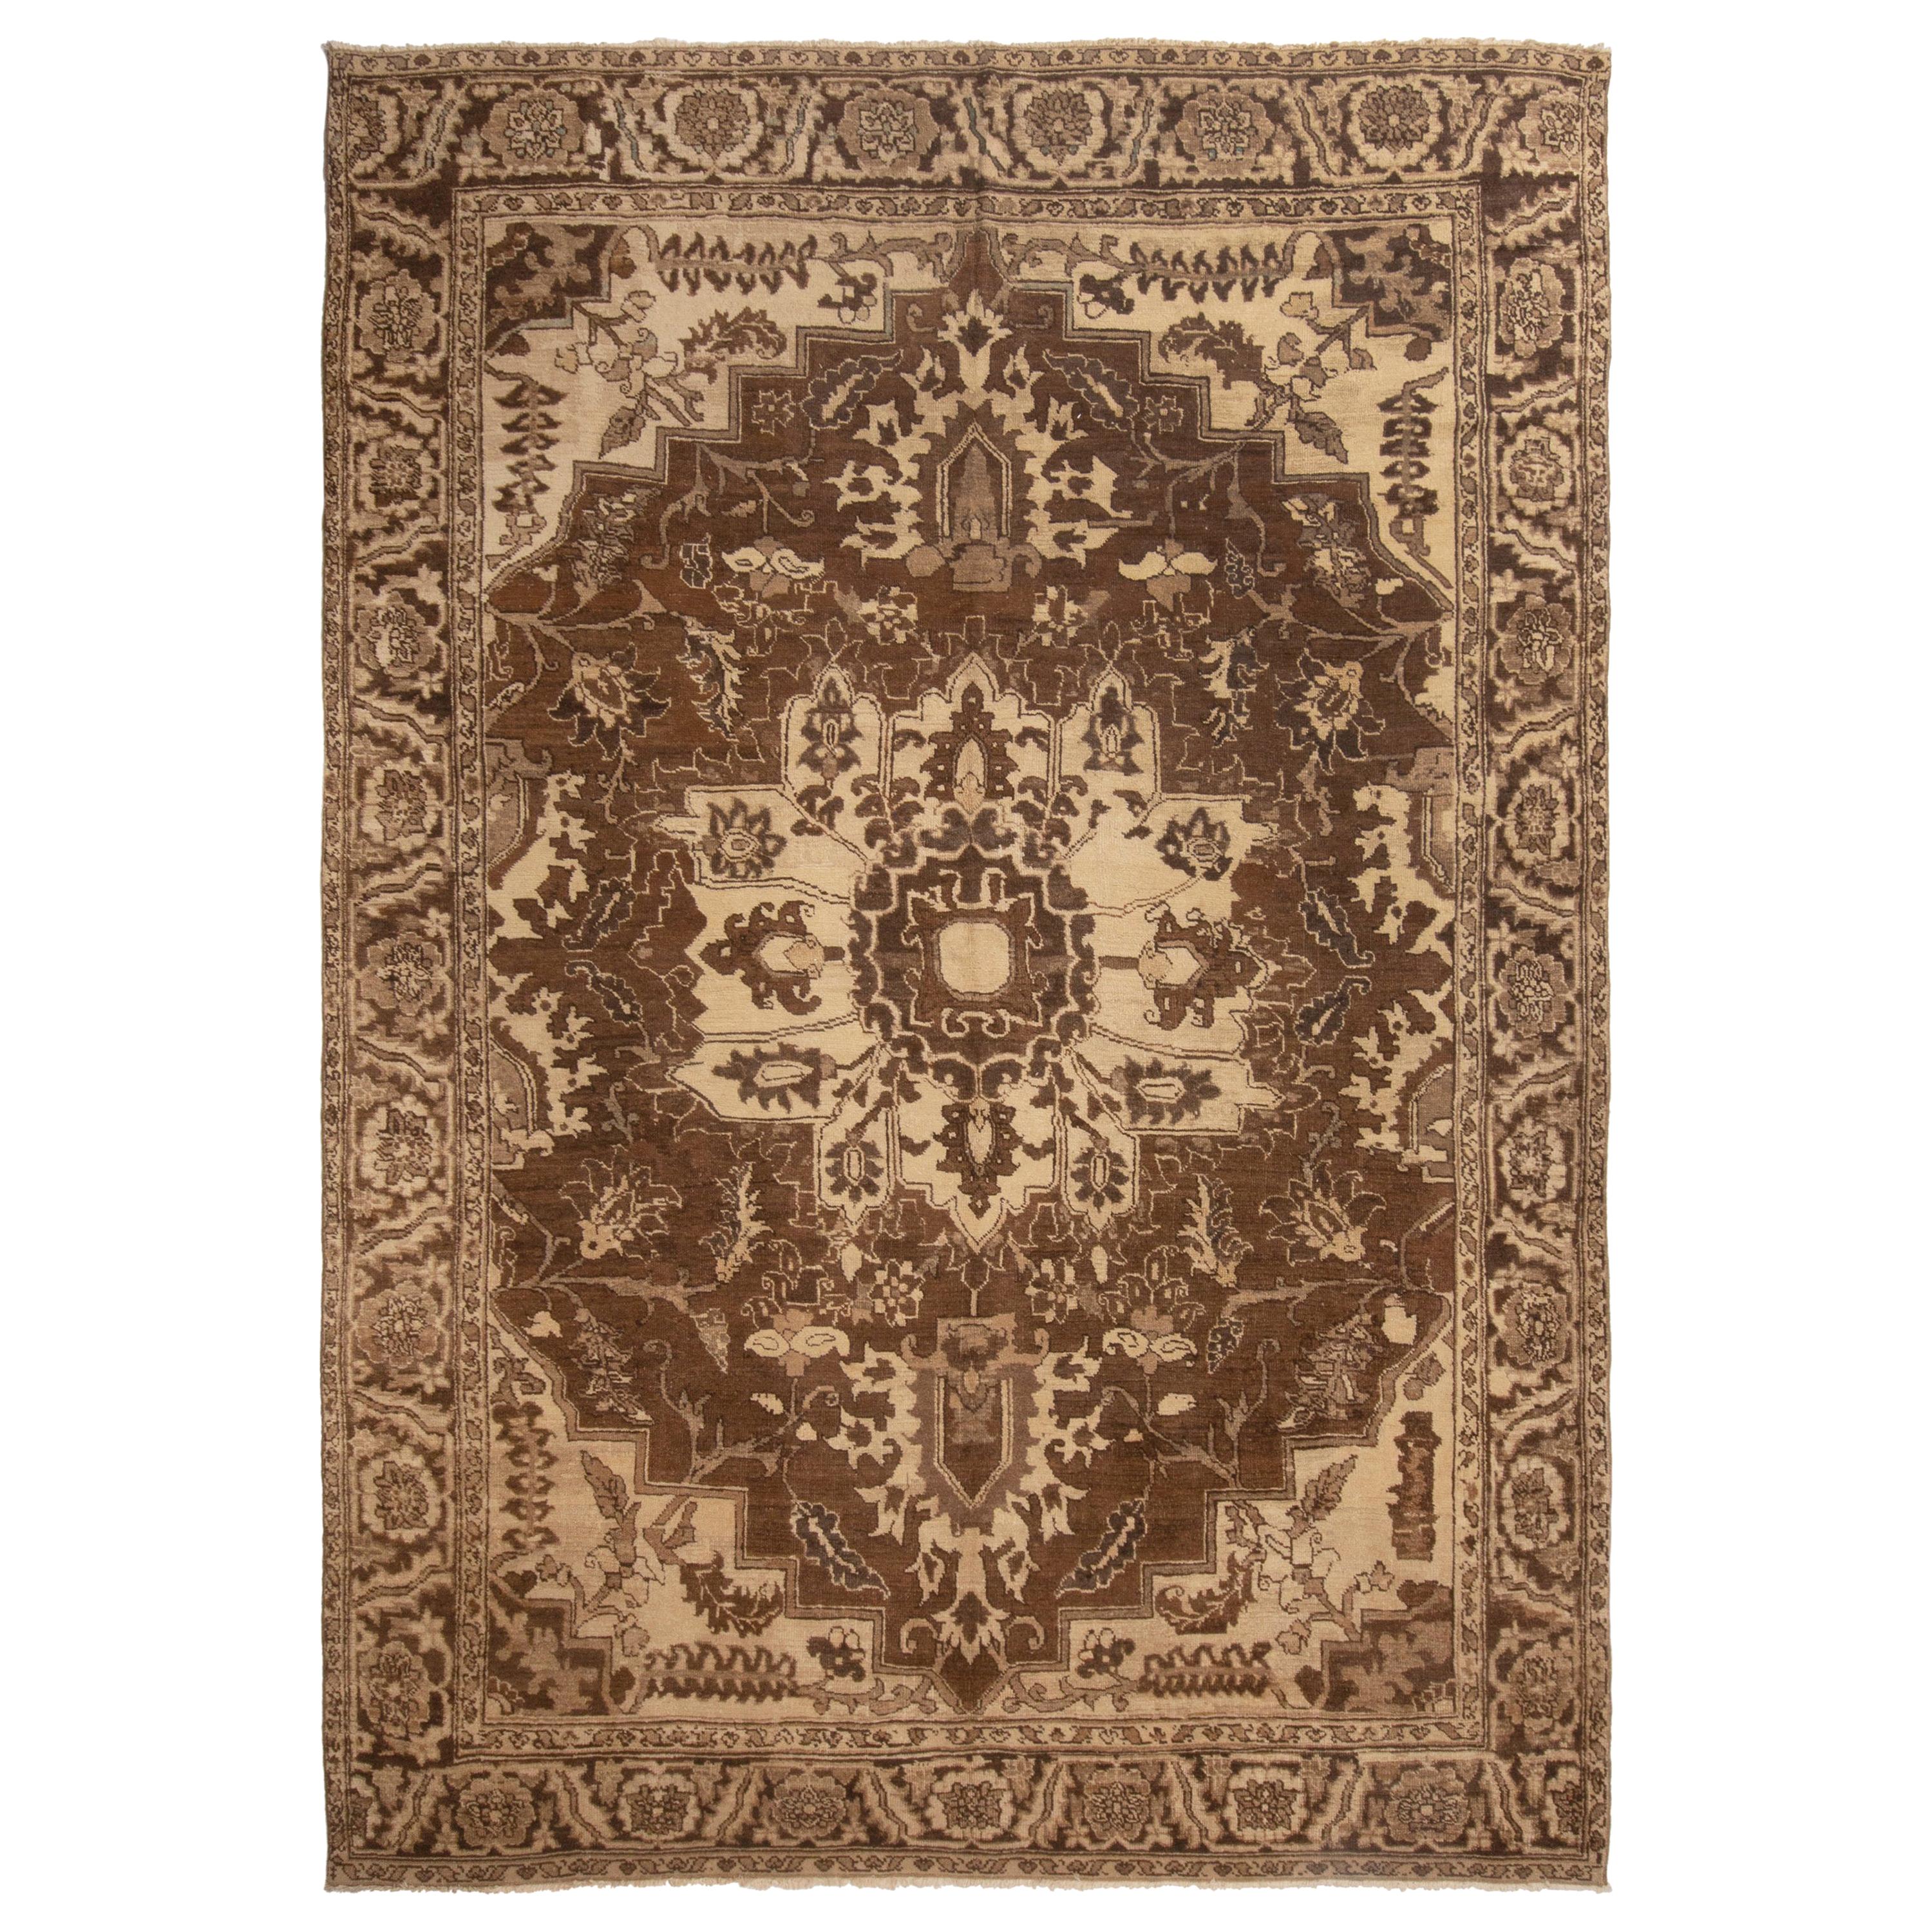 Antique Heriz Brown Medallion Rug with Geometric-Floral Patterns by Rug & Kilim For Sale